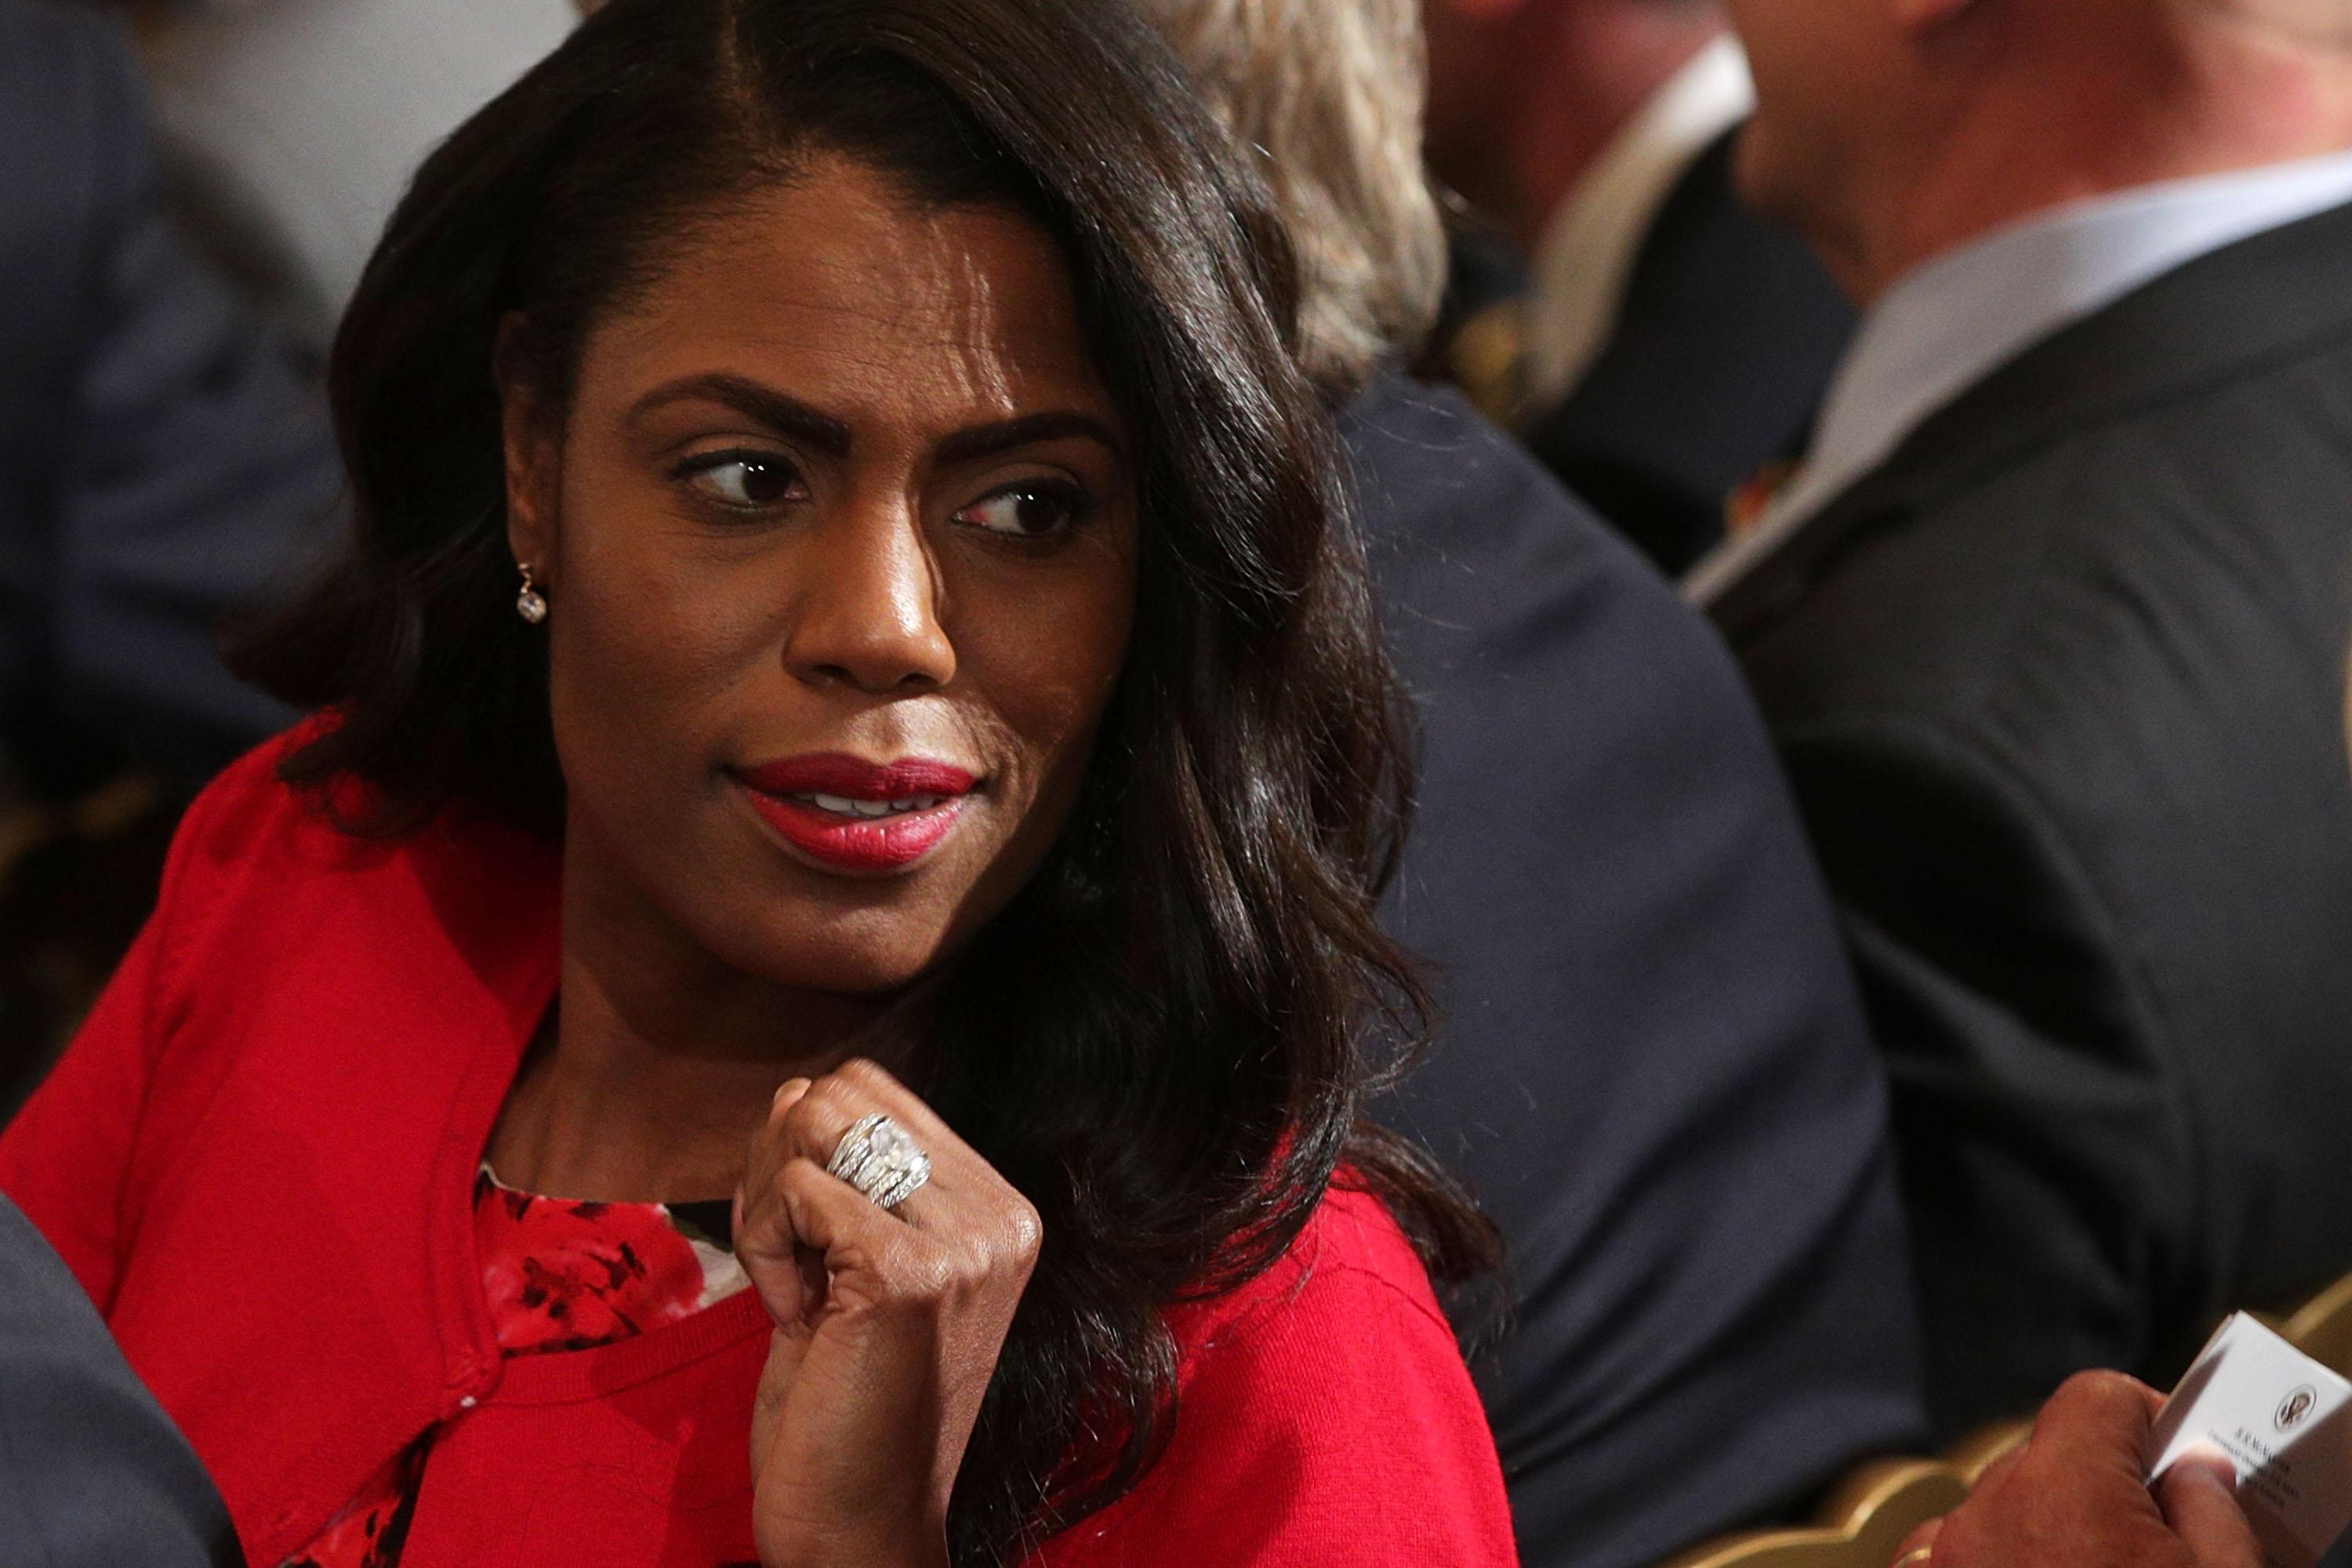 Omarosa Manigault attends a nomination announcement at the East Room of the White House October 12, 2017 in Washington, D.C.